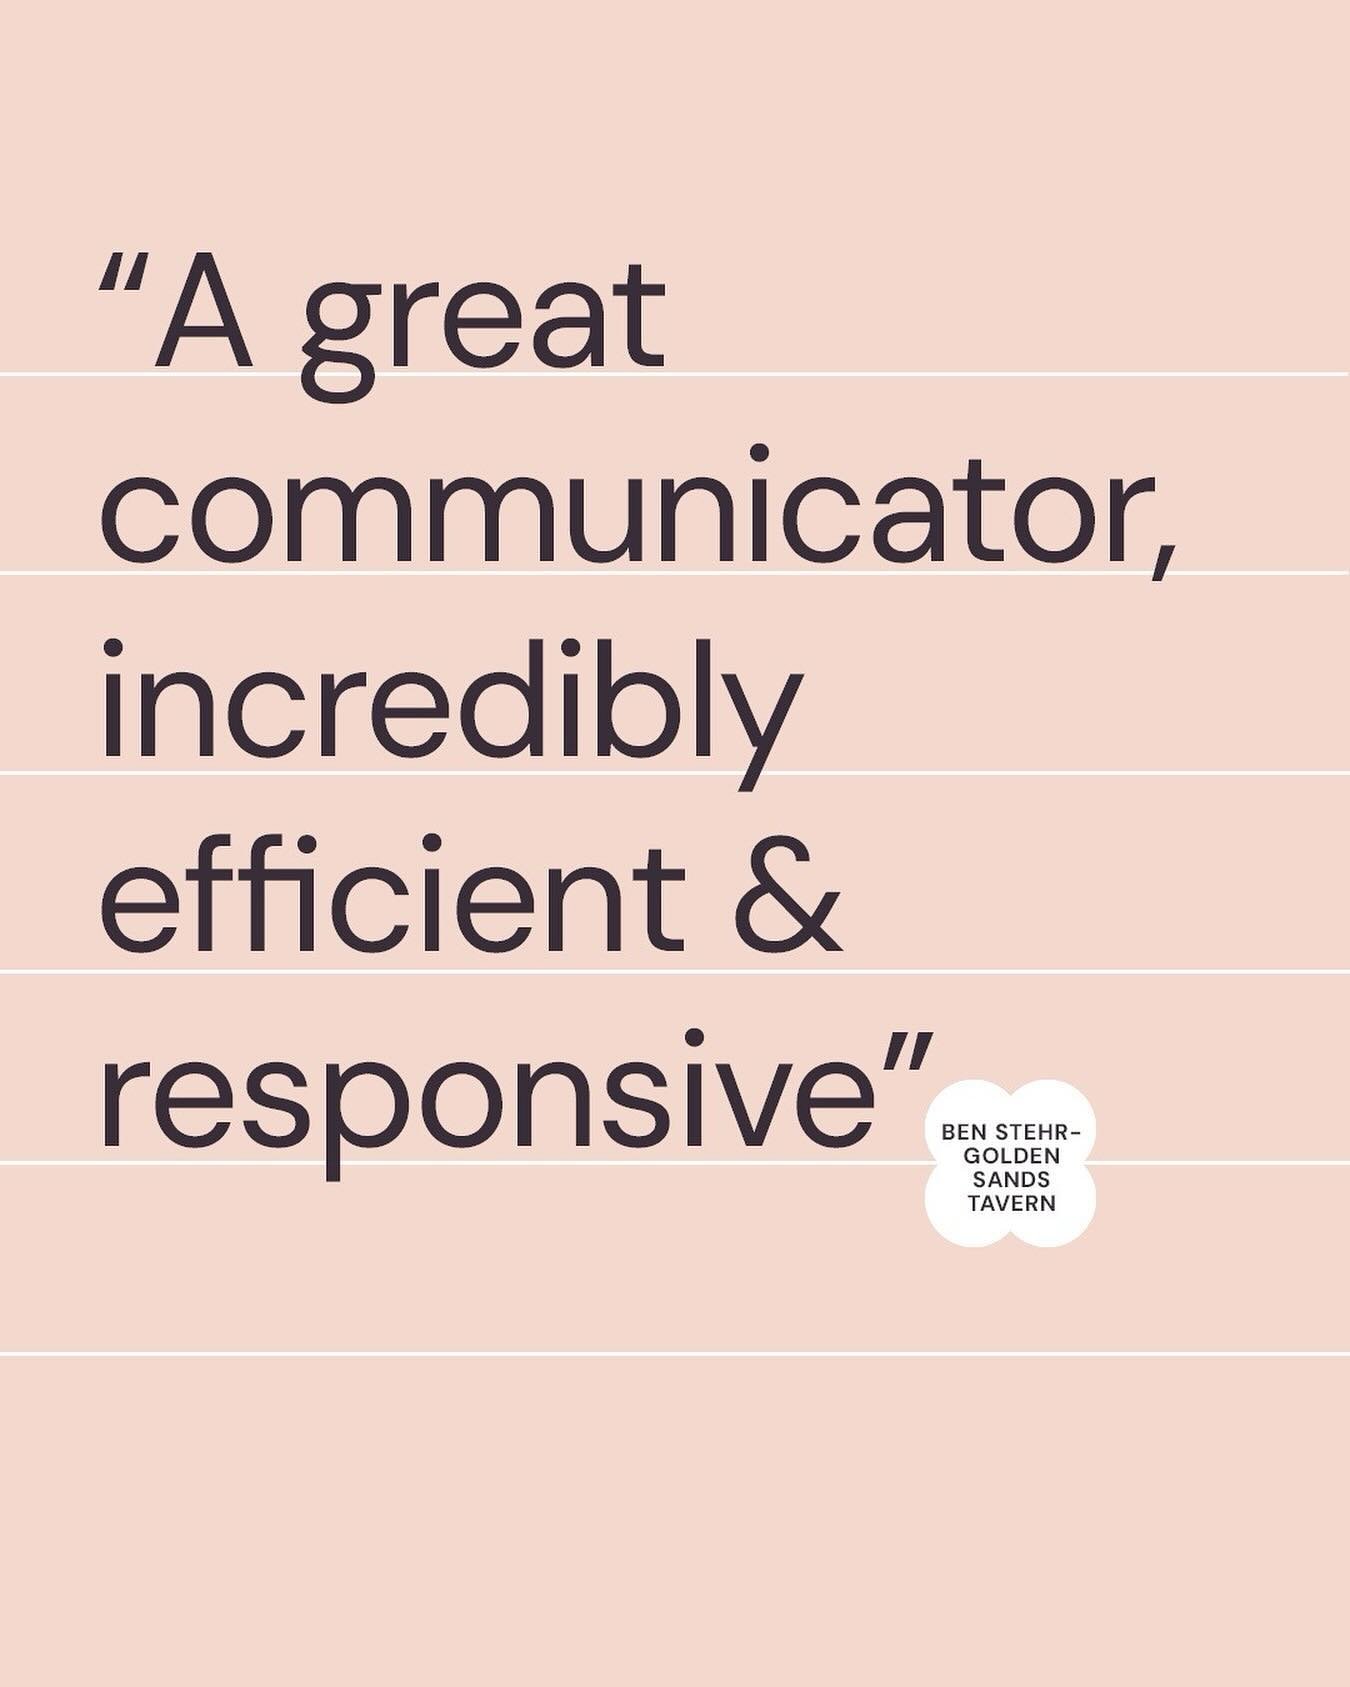 A seamless project with a bold and impactful result is built on these 3 things:

☑ communication 
☑ efficiency
☑ responsiveness

Trust is a huge part of the work that I do. I can&rsquo;t build trust if I don&rsquo;t practice clear and consistent comm